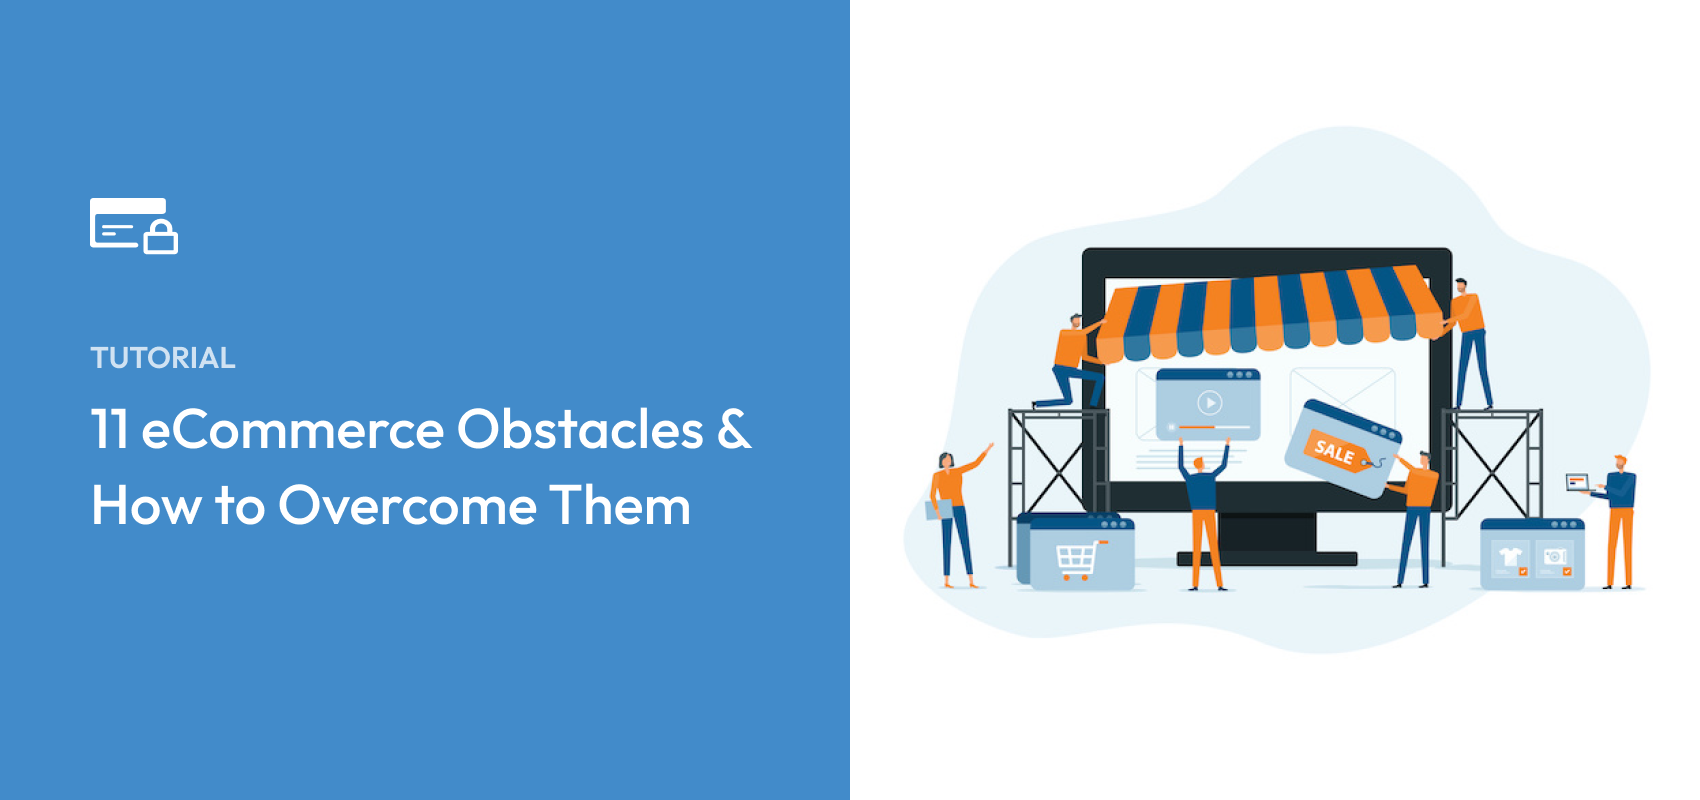 11 eCommerce Obstacles & How to Overcome Them